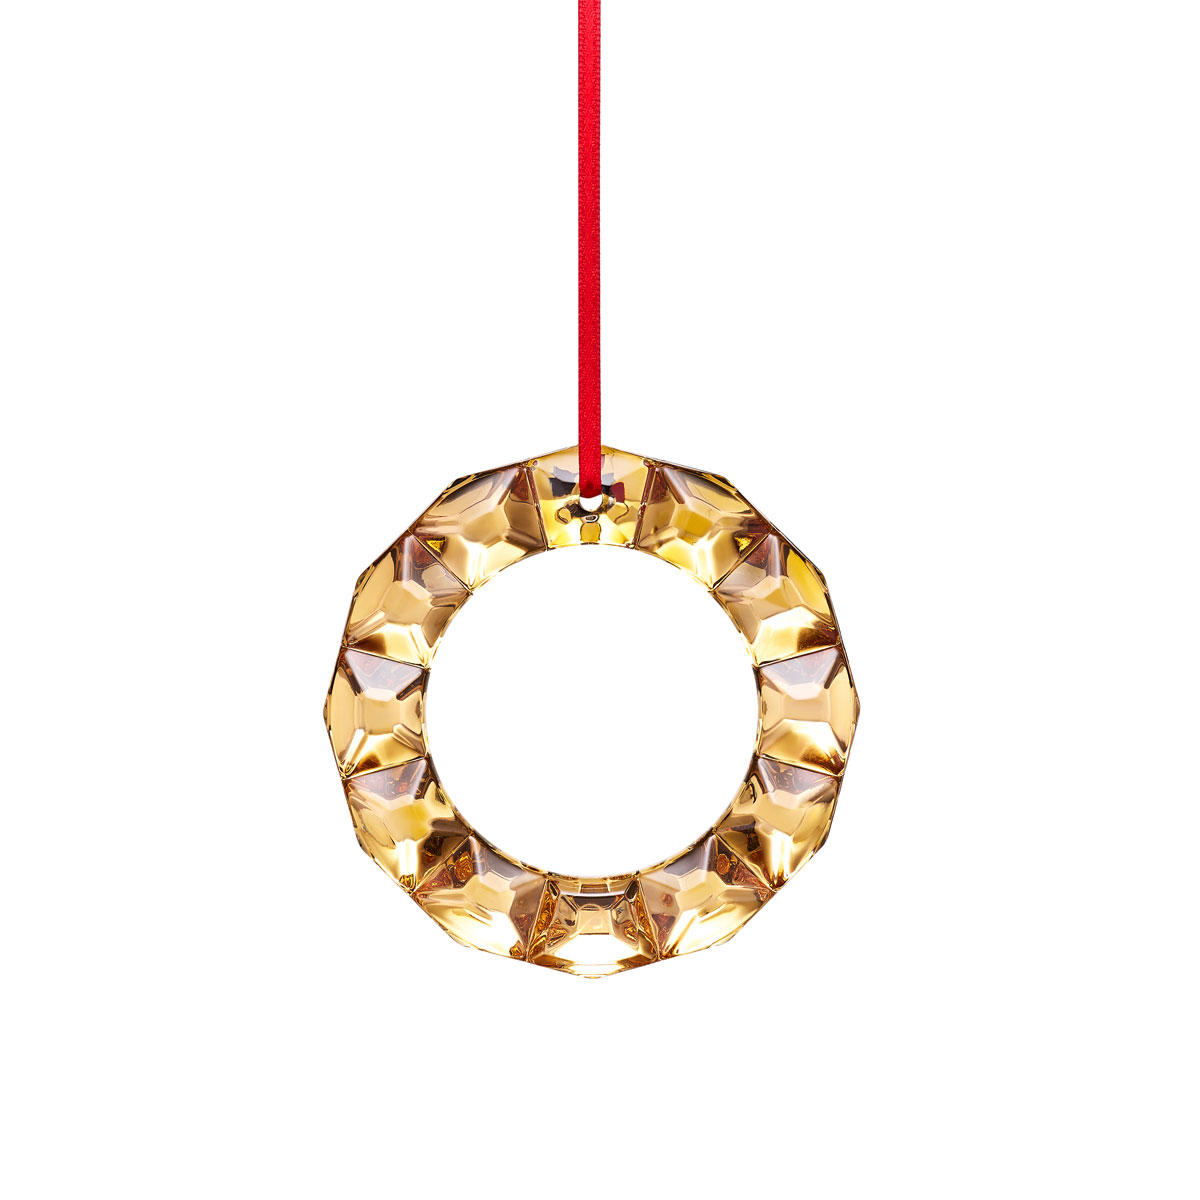 Baccarat 2020 Annual Wreath Christmas Ornament, 20k Gold